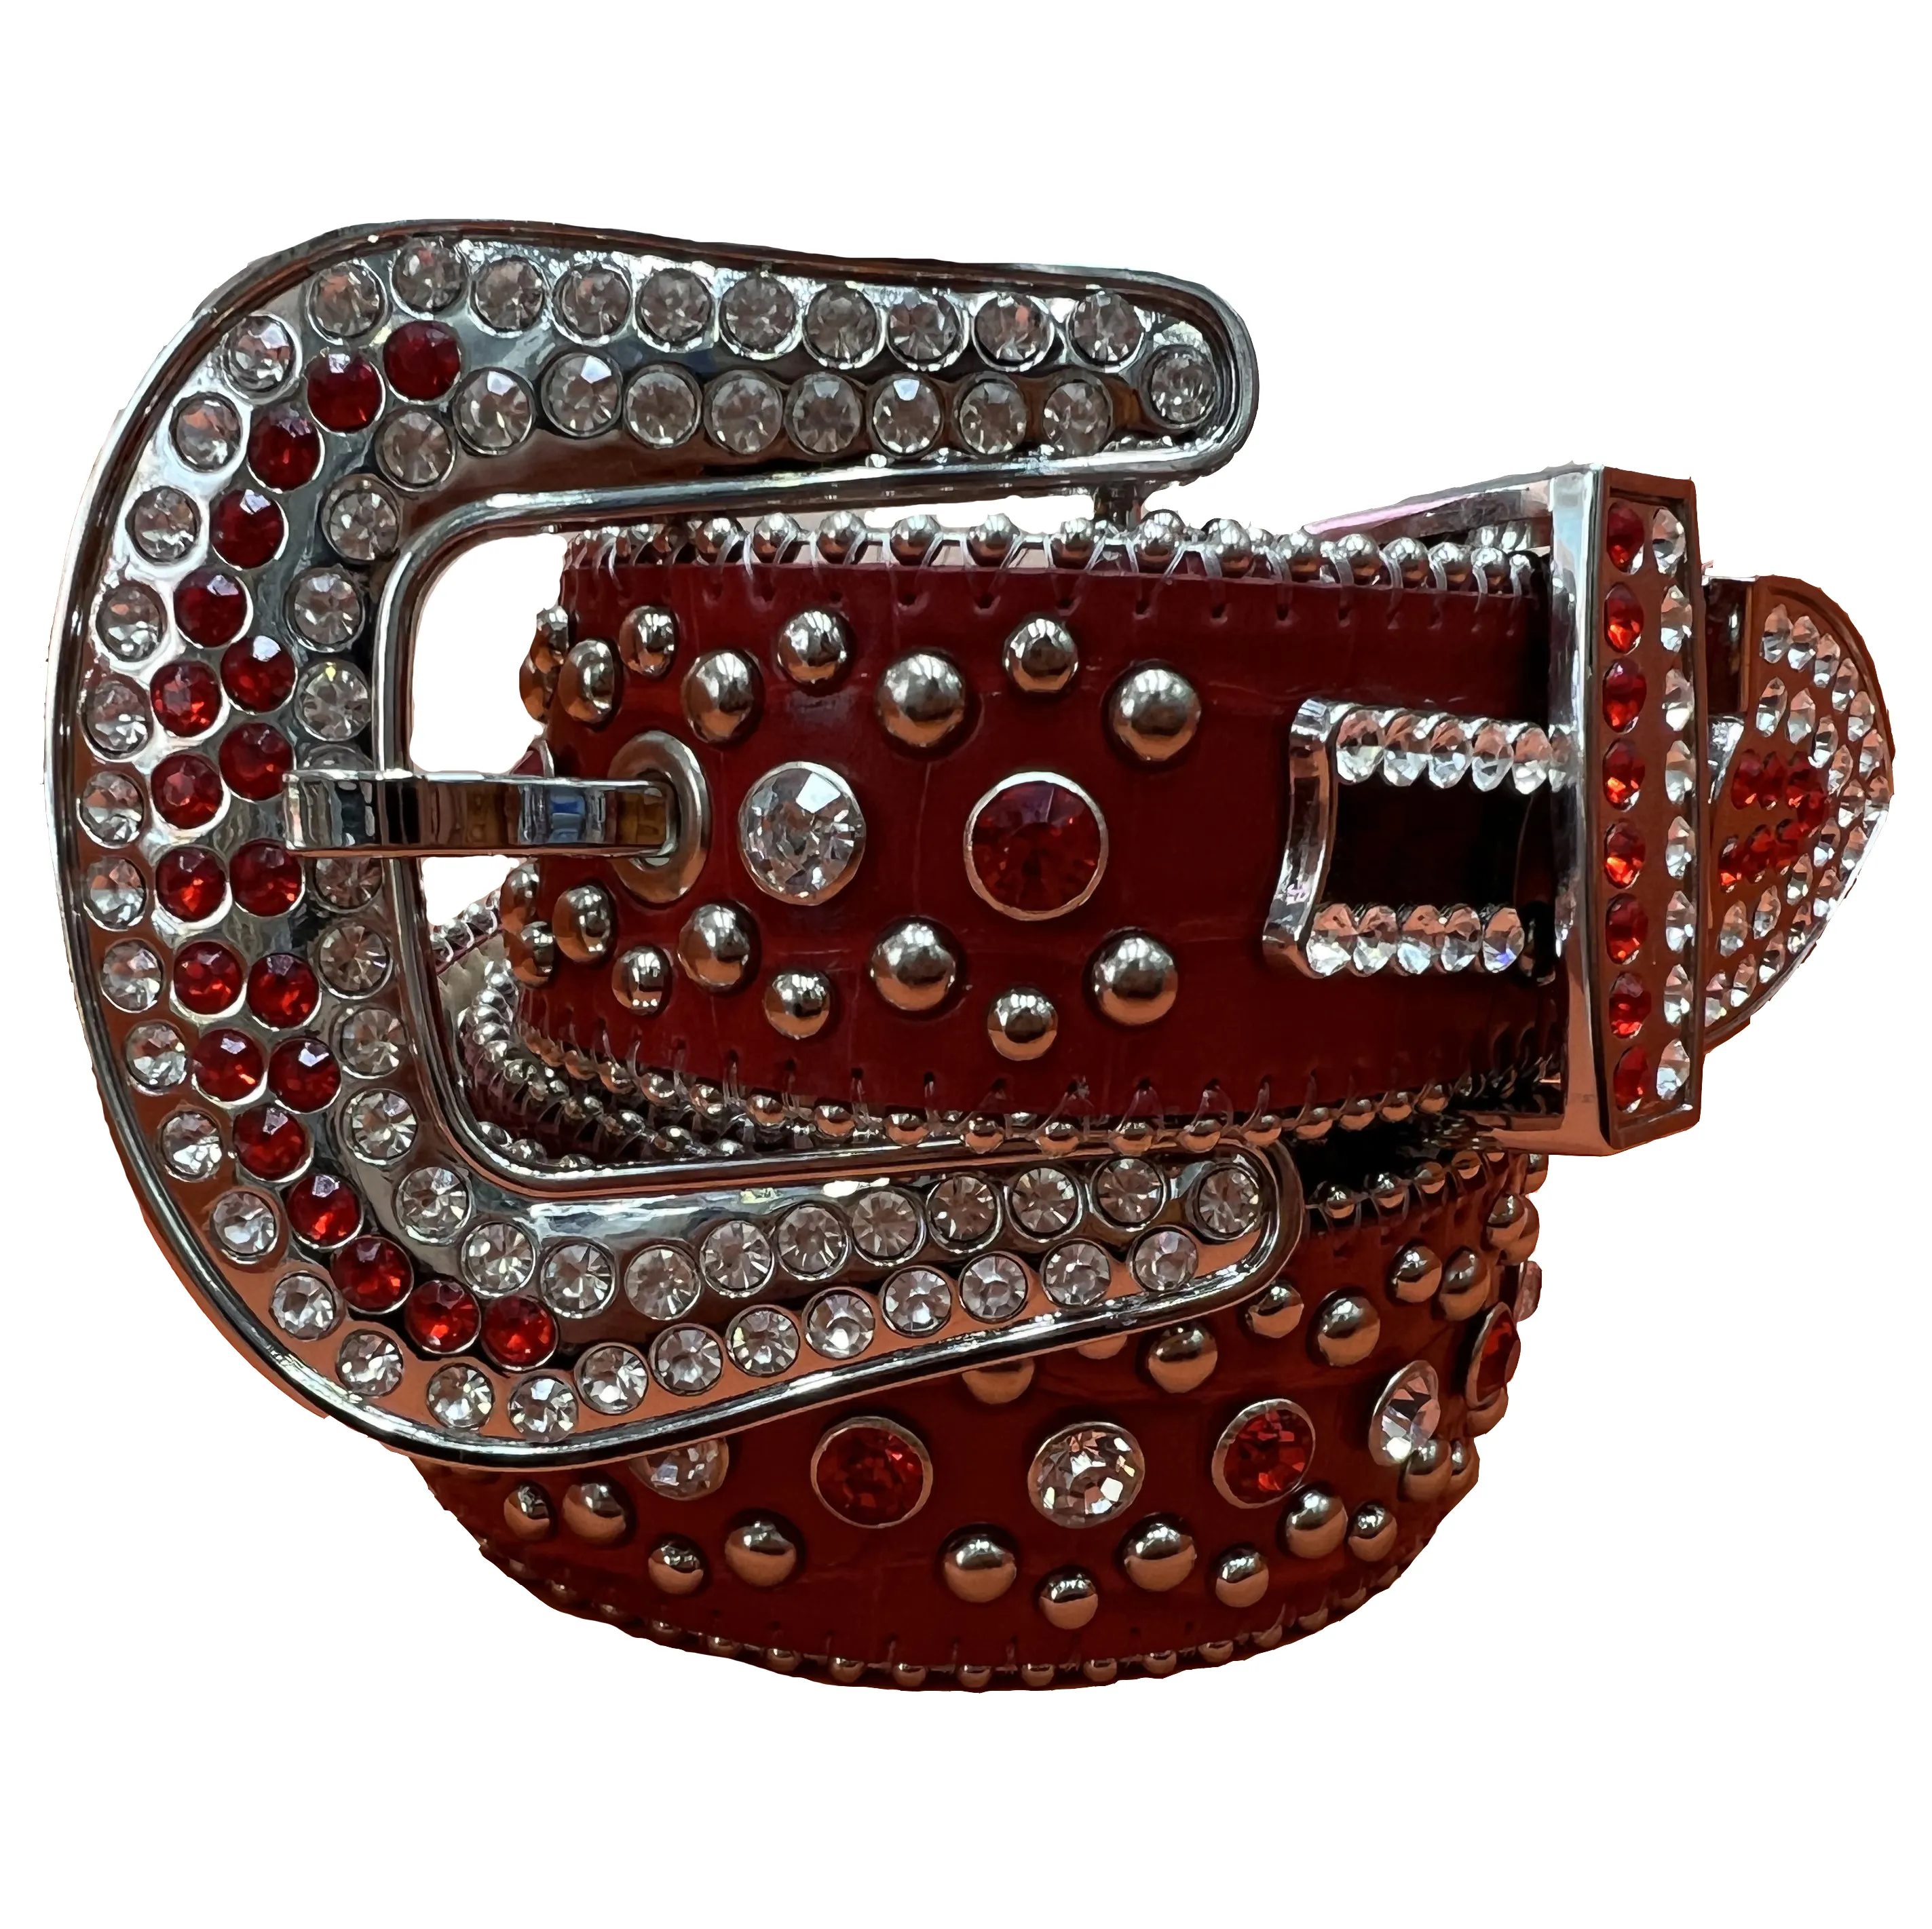 Red colored bb belt for men womens designer belts with full rhinestones needle buckle waistbands